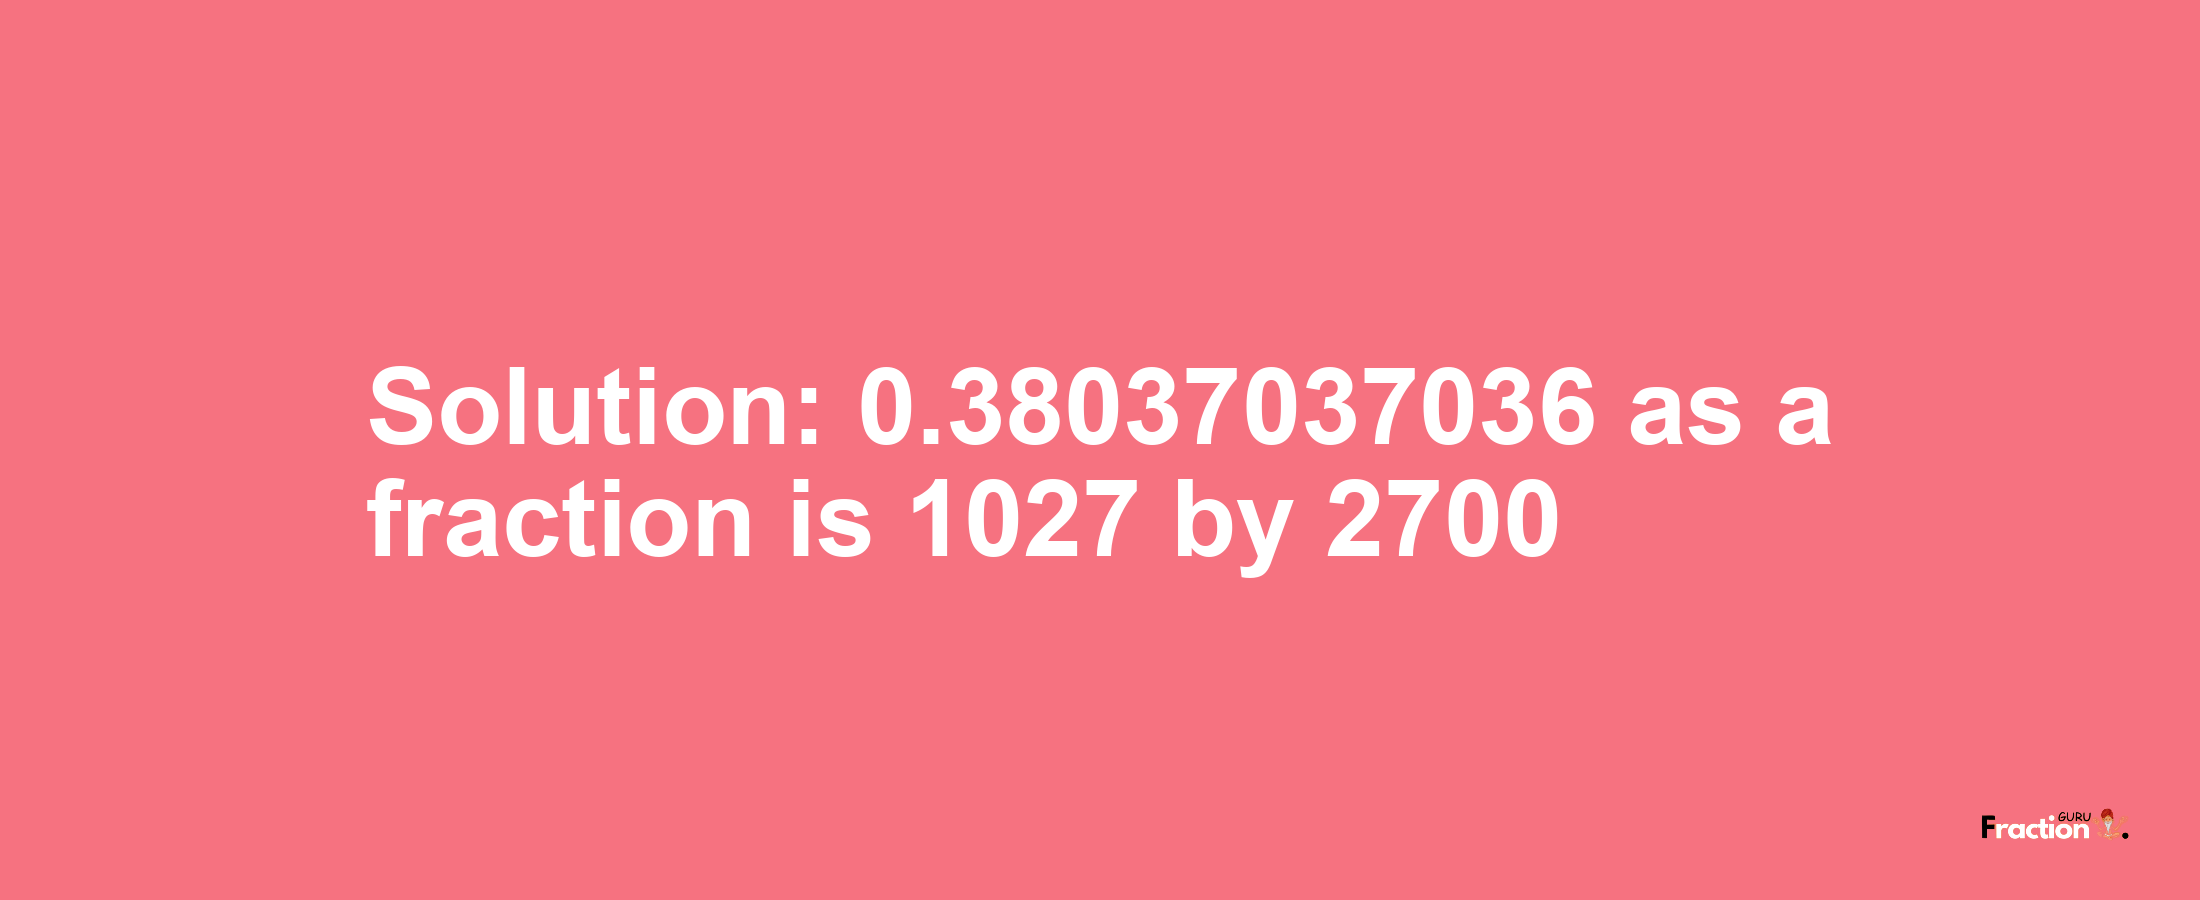 Solution:0.38037037036 as a fraction is 1027/2700